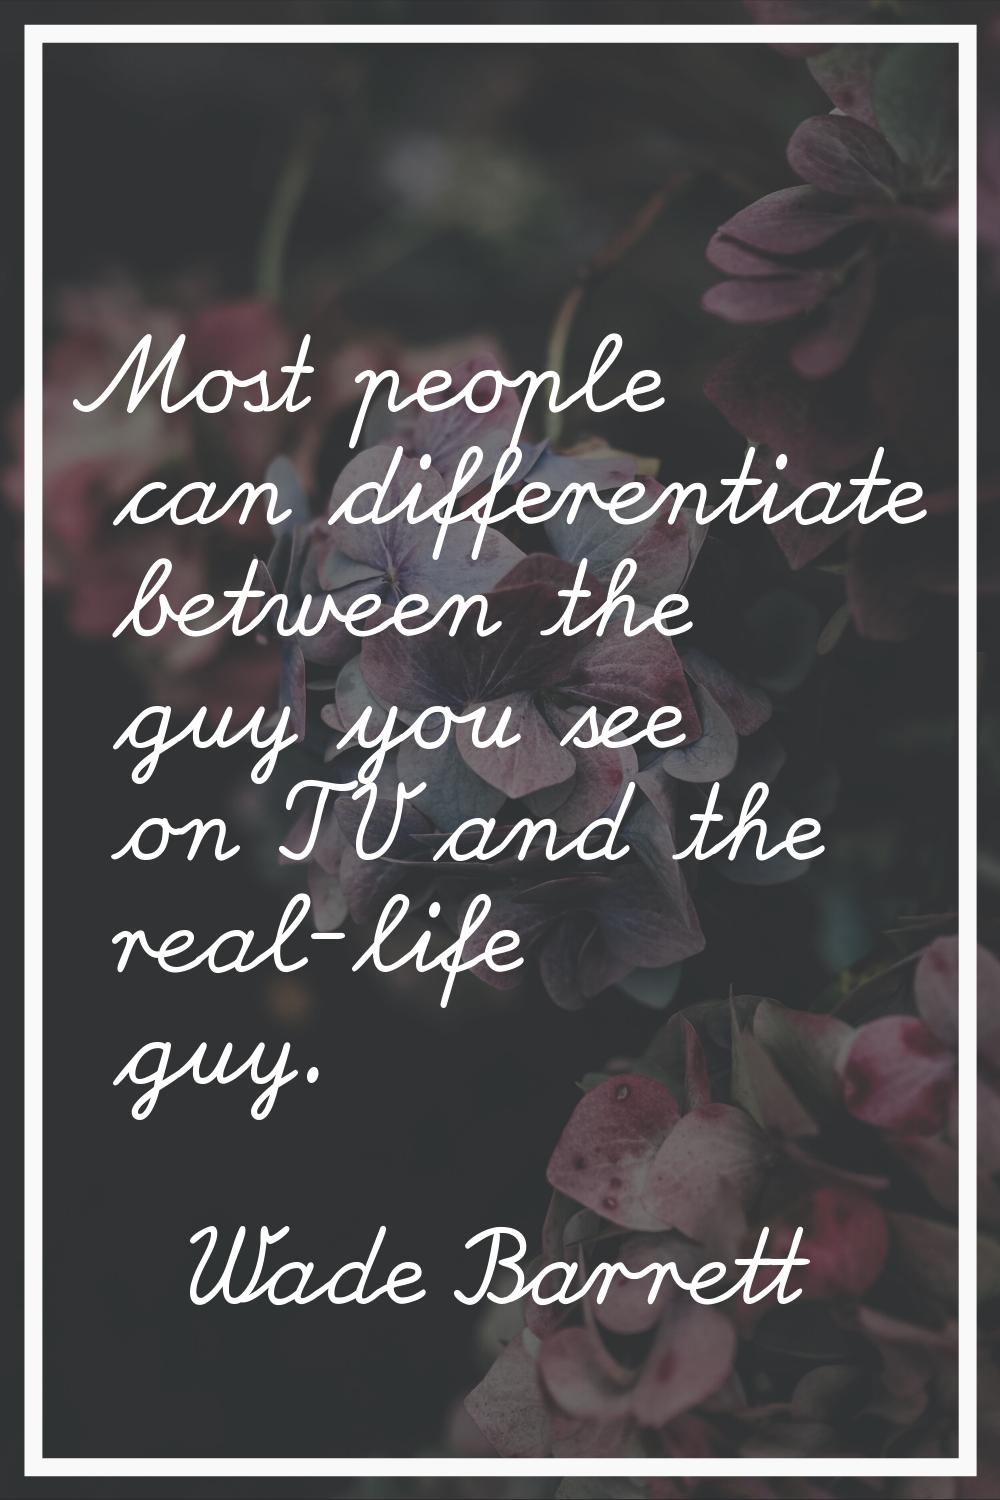 Most people can differentiate between the guy you see on TV and the real-life guy.